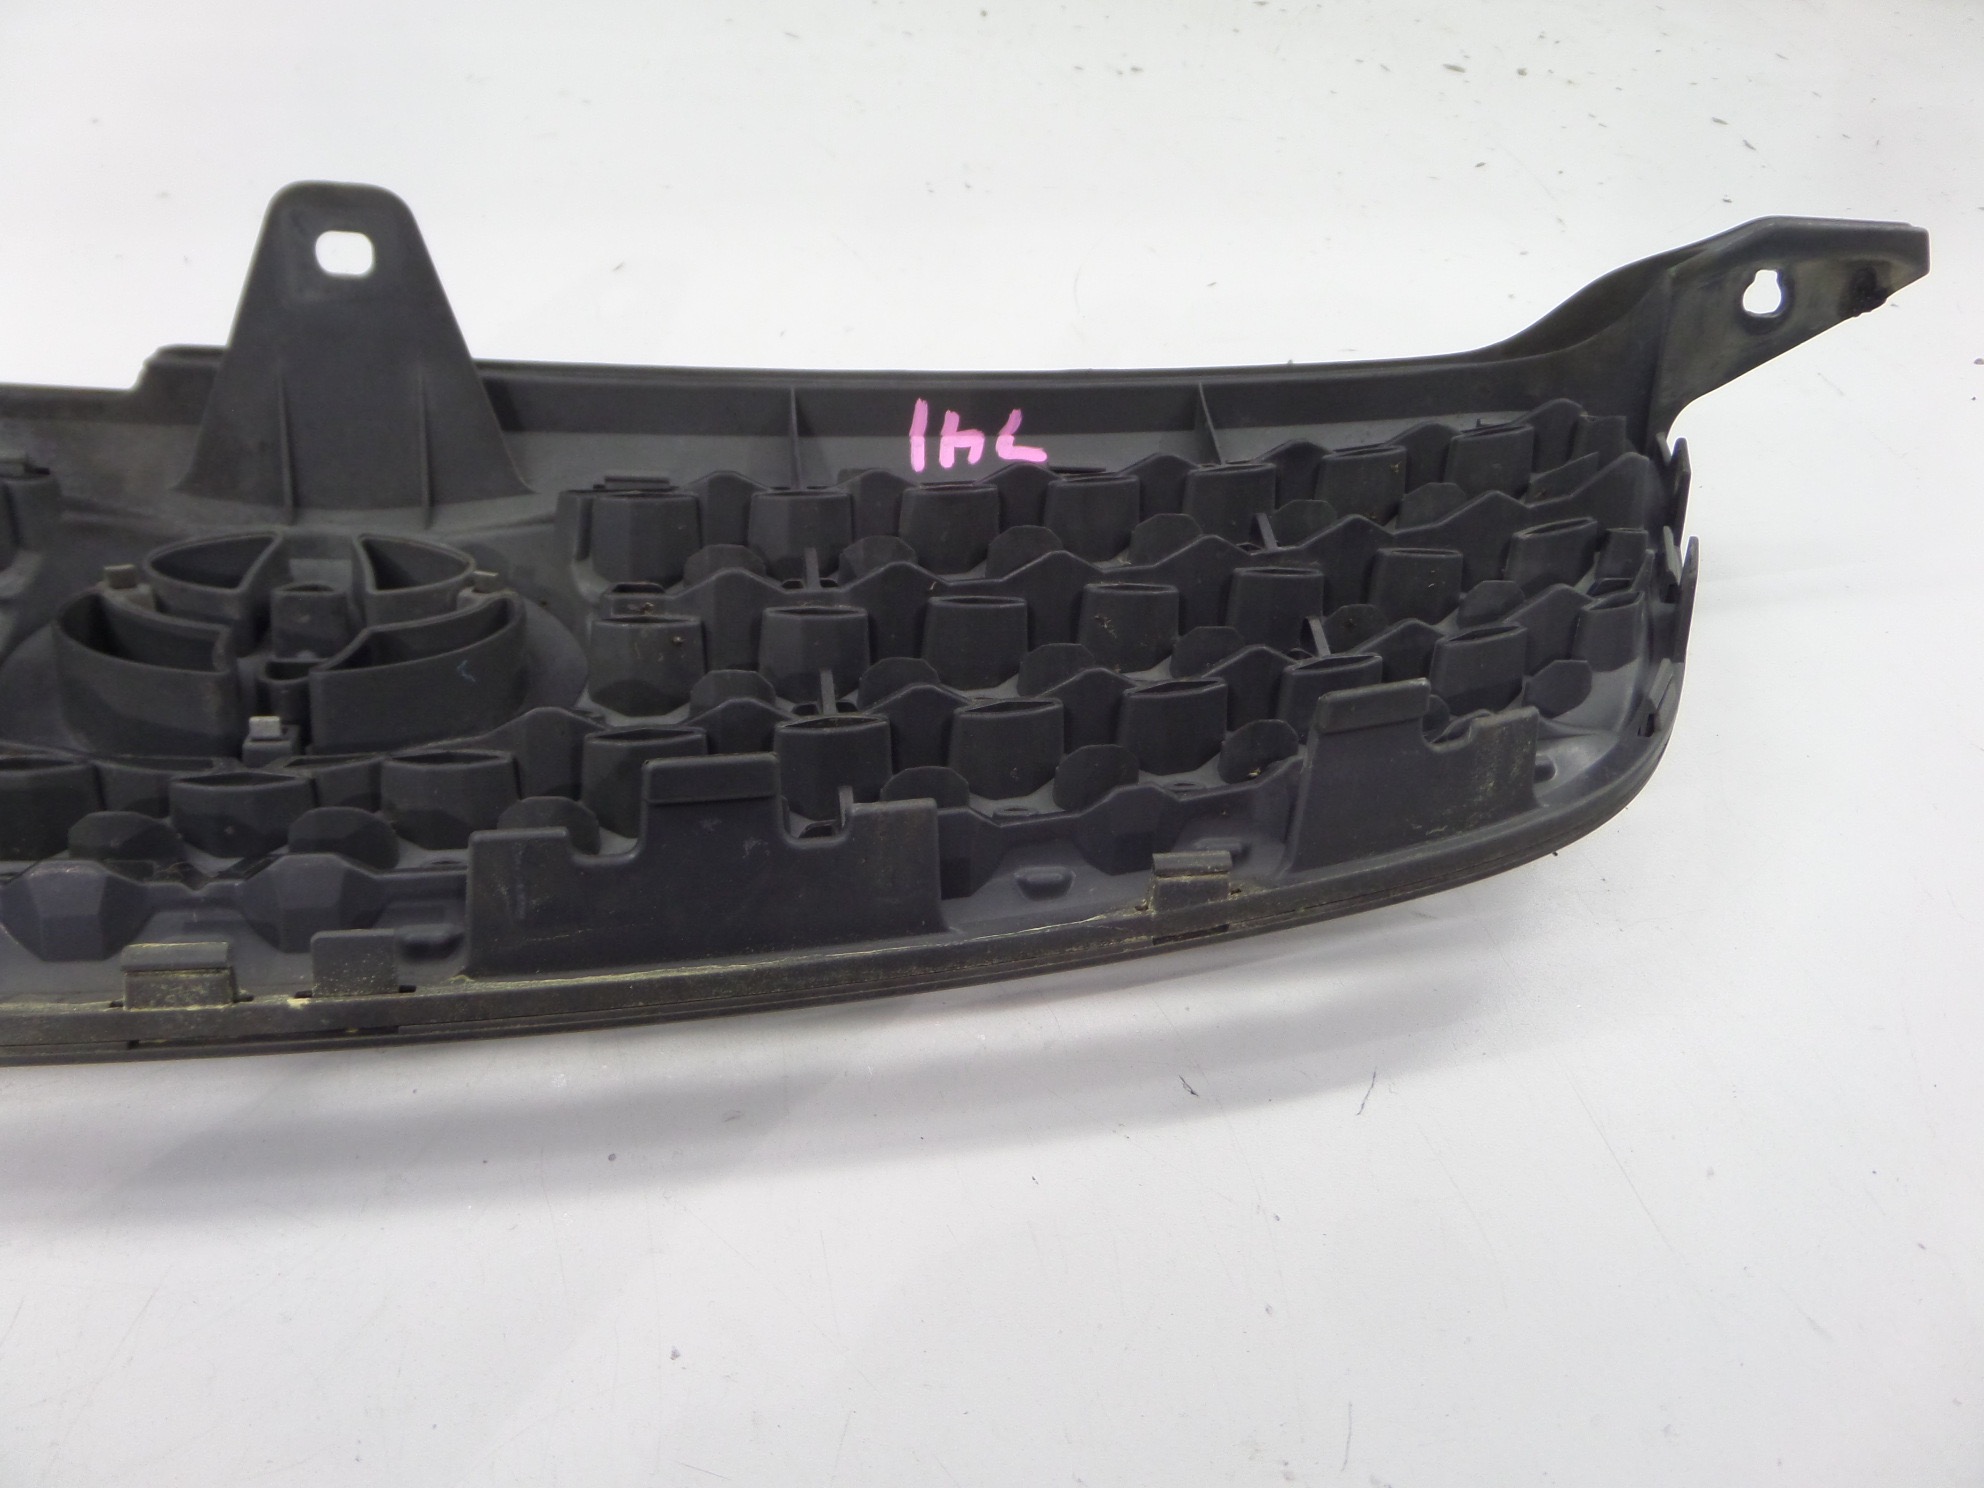 Toyota Corolla XRS Front Grille Grill E120 0308 OEM 53100